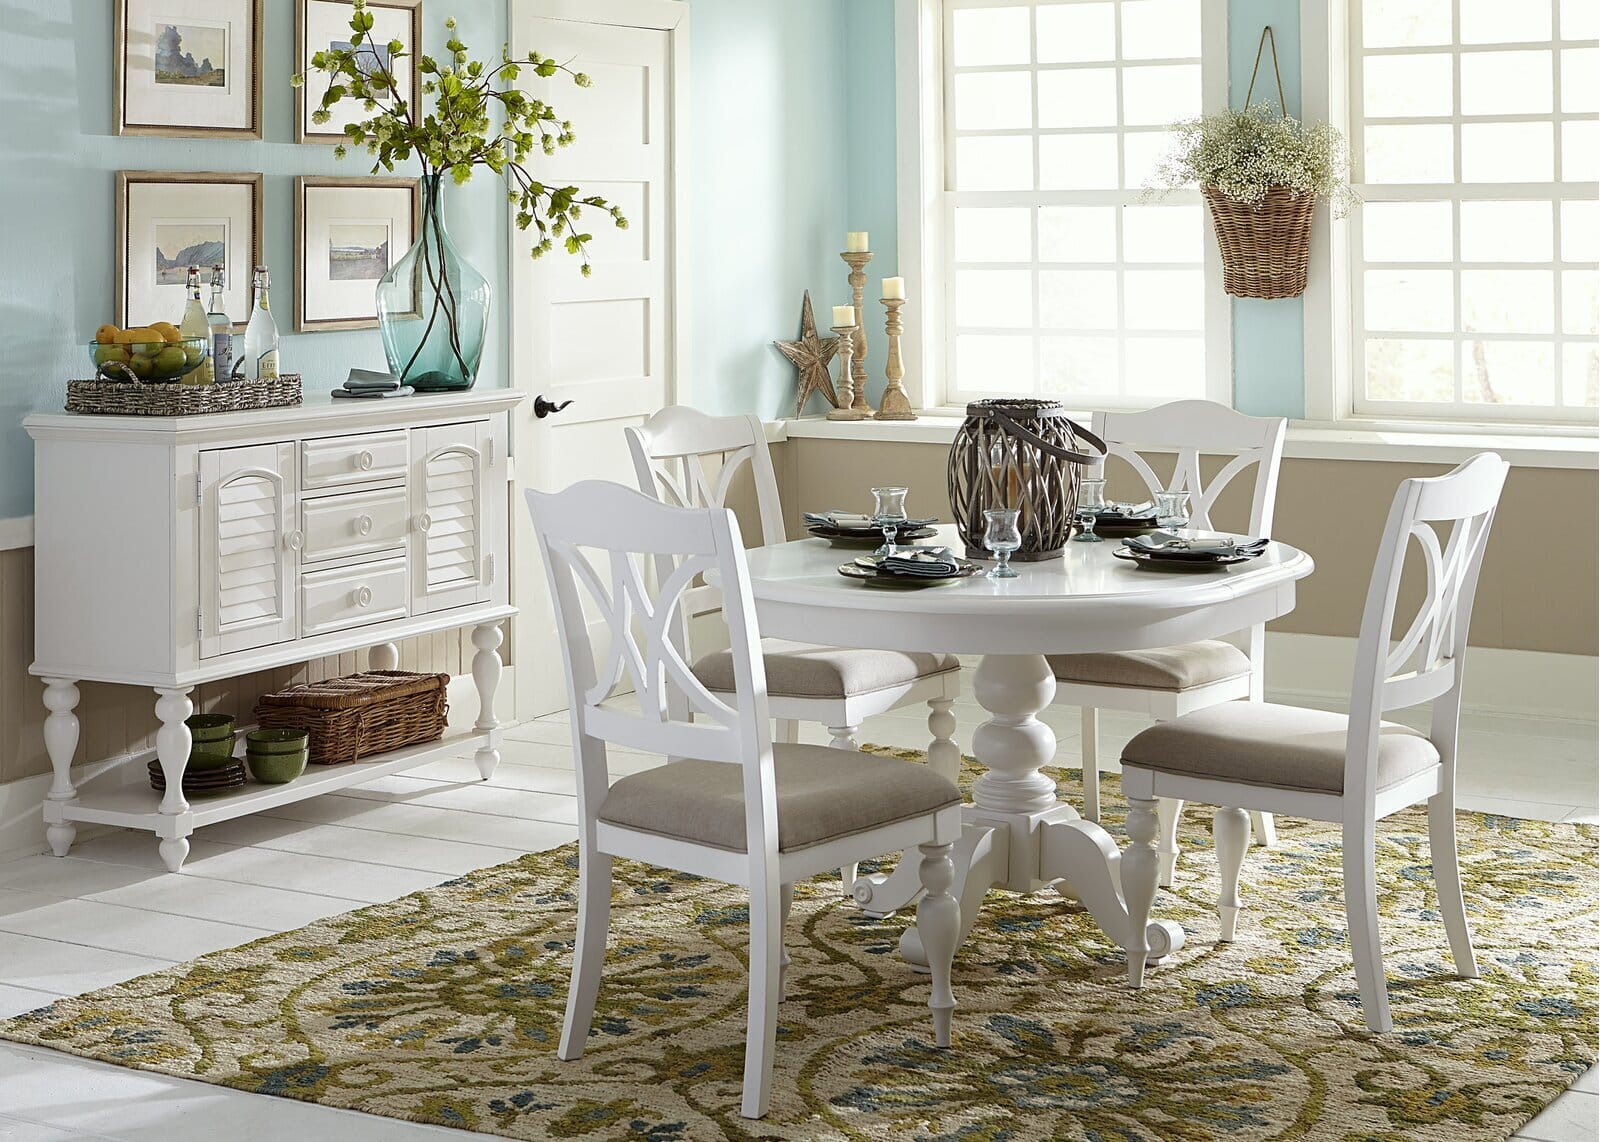 21 Stunning French Country Dining Tables for Your Home